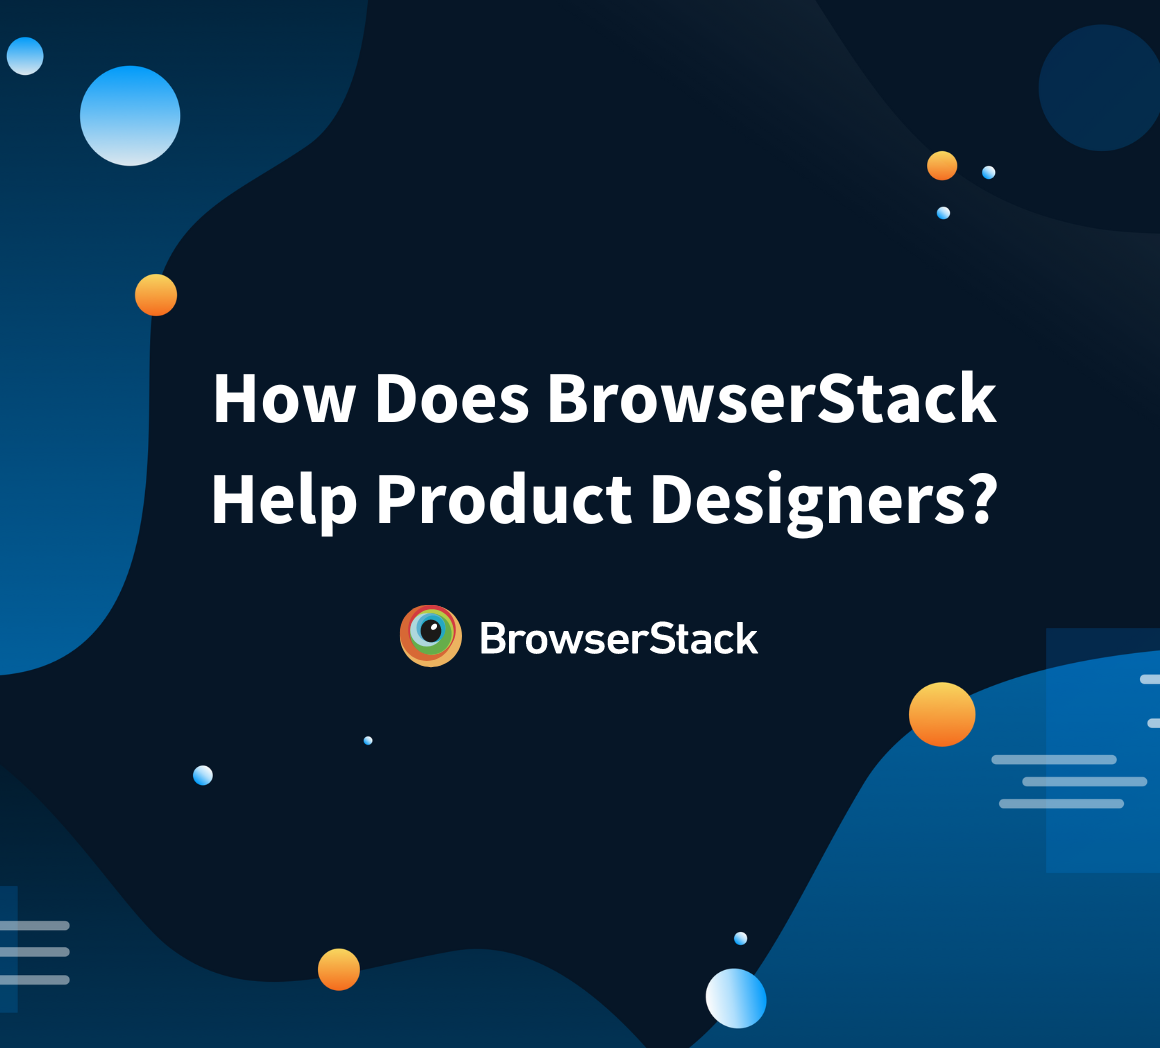 How Does BrowserStack Help Product Designers?